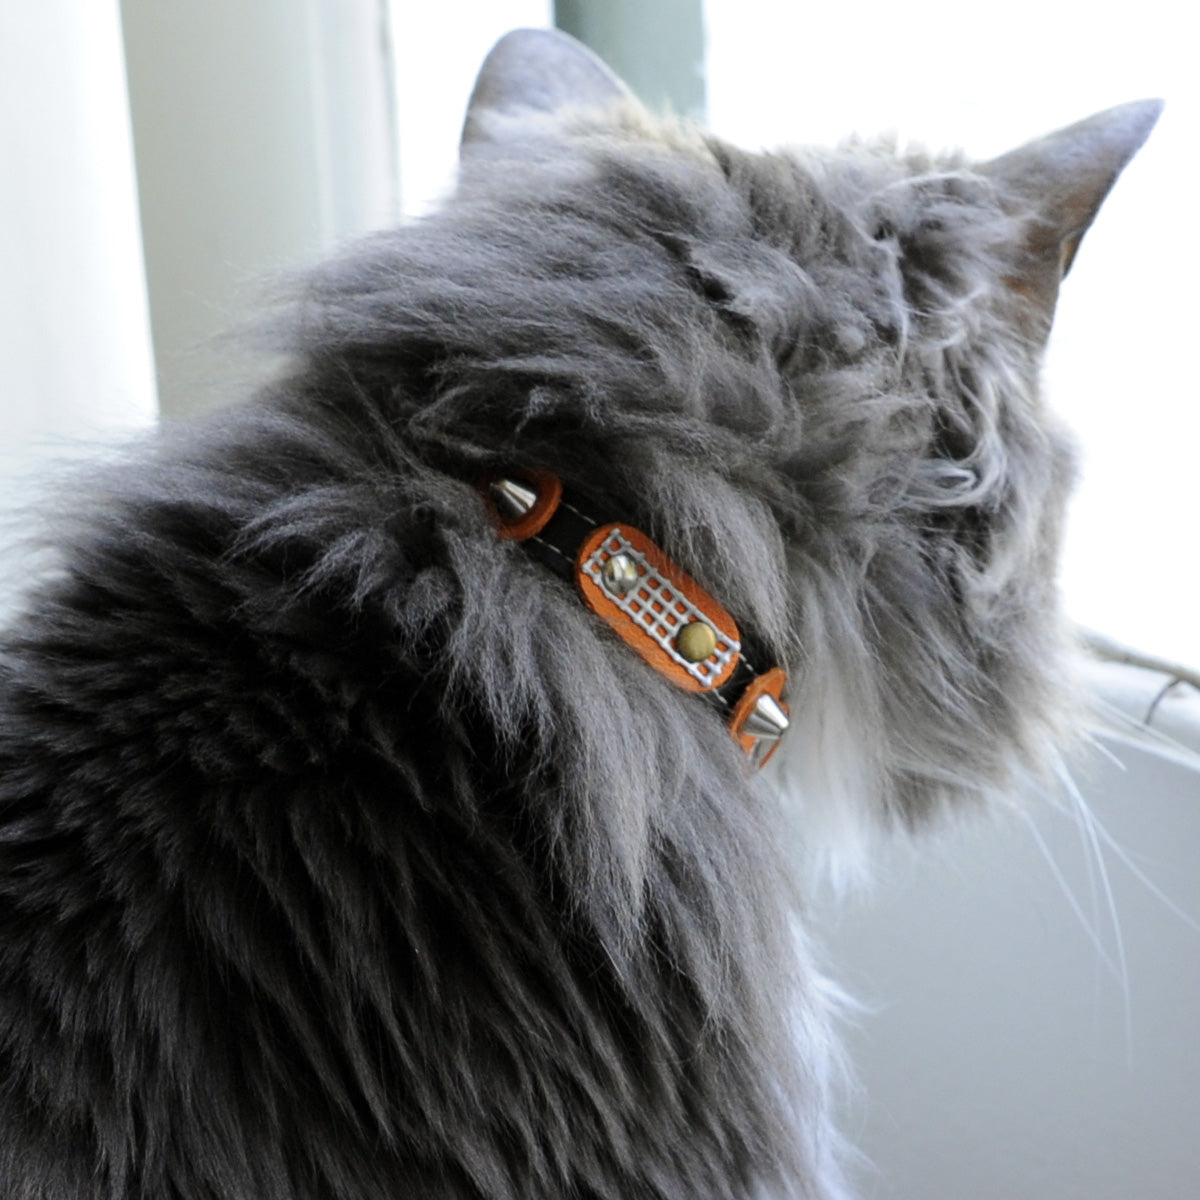 Superpipapo Luxury Leather Cat Collar, In Black With Studs, Spikes & Retro Orange Patches | at Made Moggie